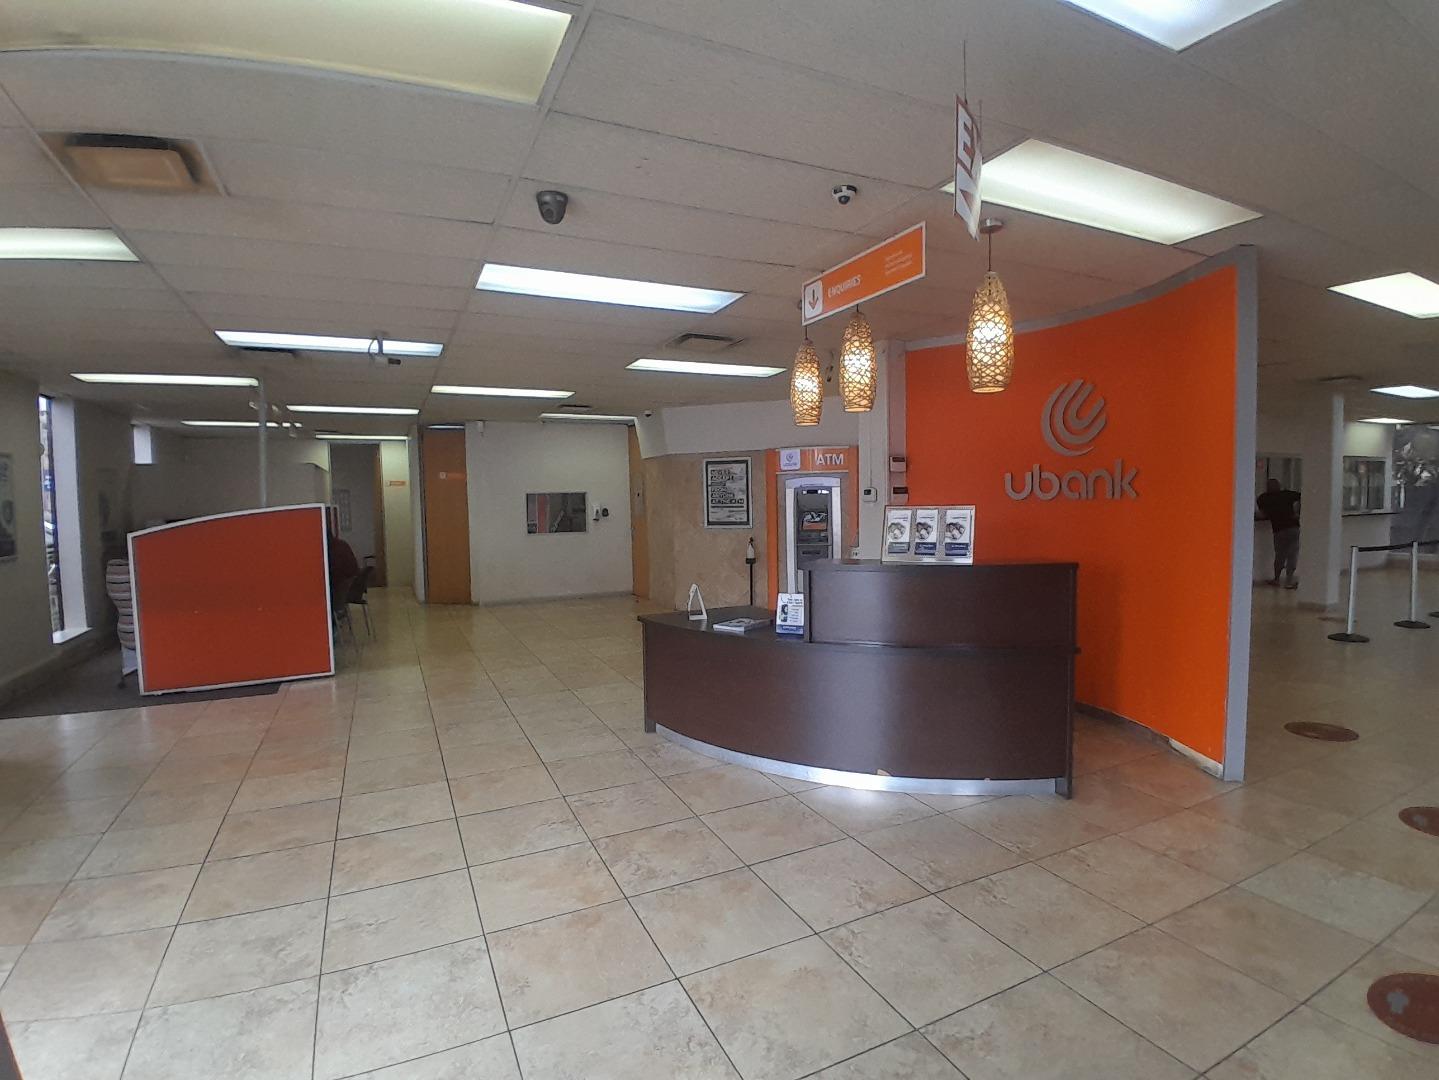 Commercial property to rent in Brits Central - 1 Kerk St